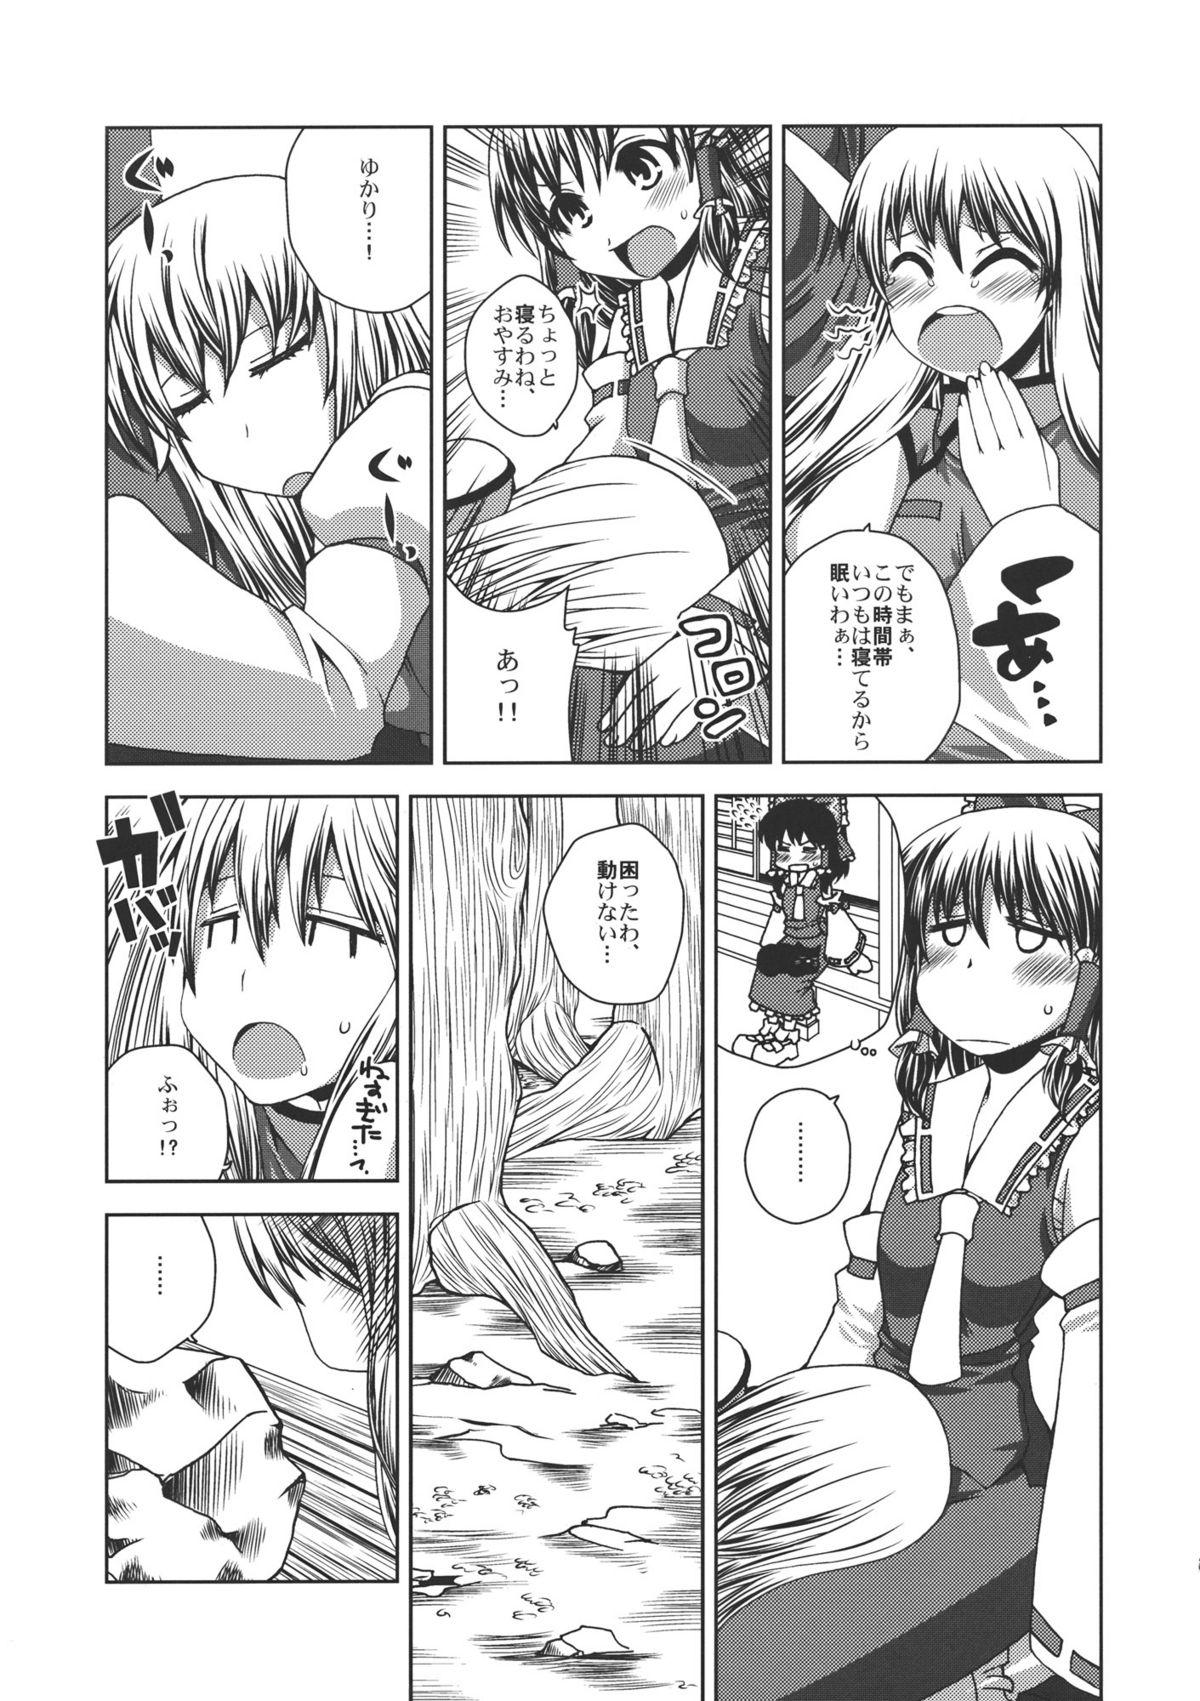 She ONE WEEK Erste Nacht - Touhou project Gay Toys - Page 7